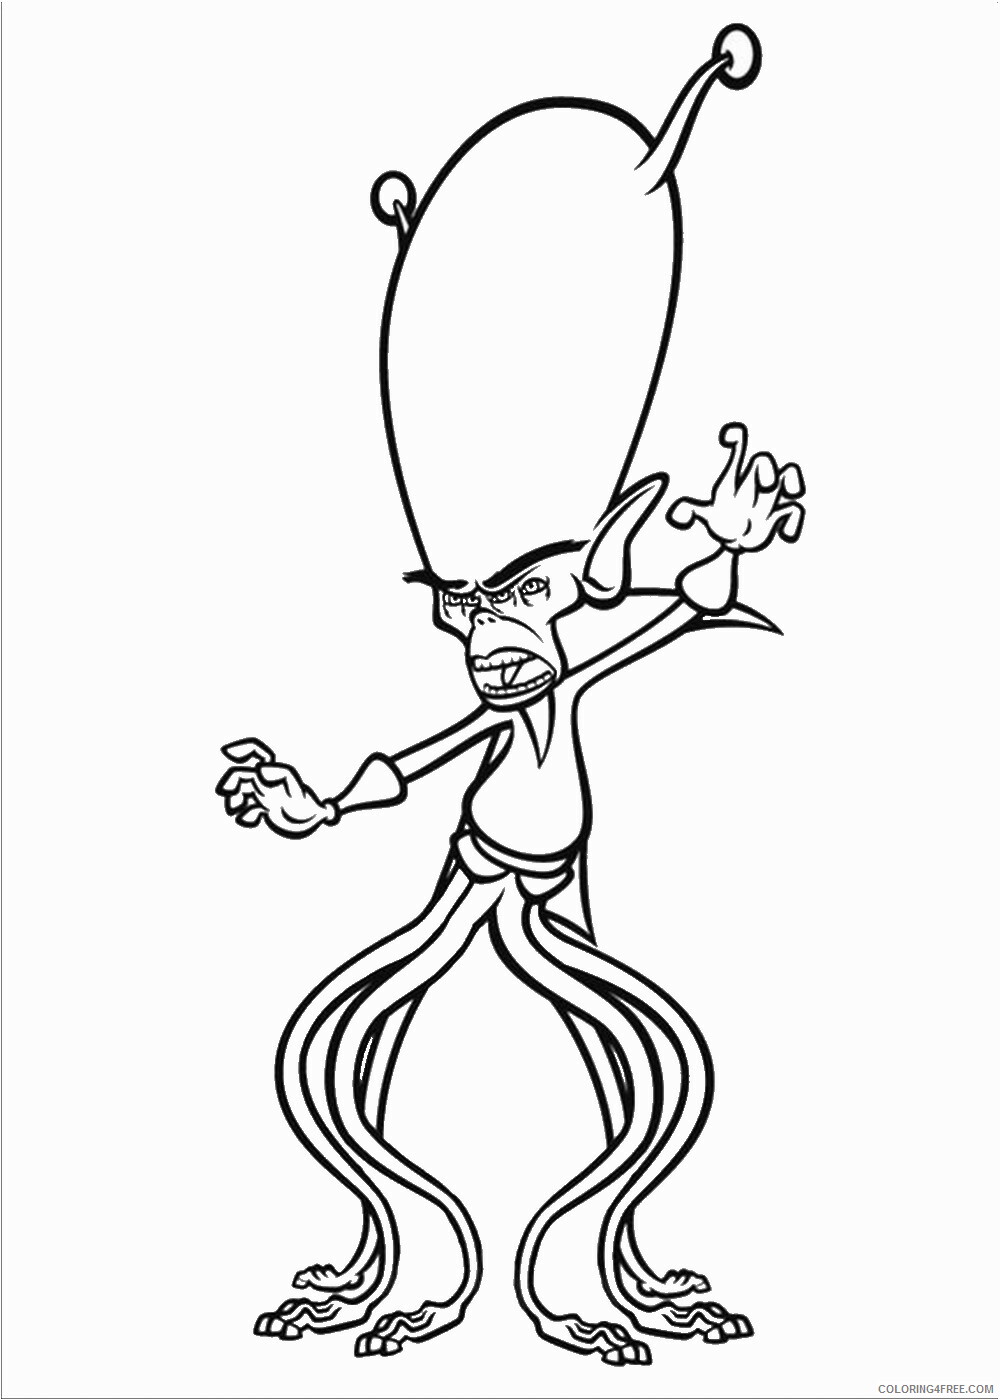 Monsters vs Aliens Coloring Pages TV Film Printable 2020 05341 Coloring4free